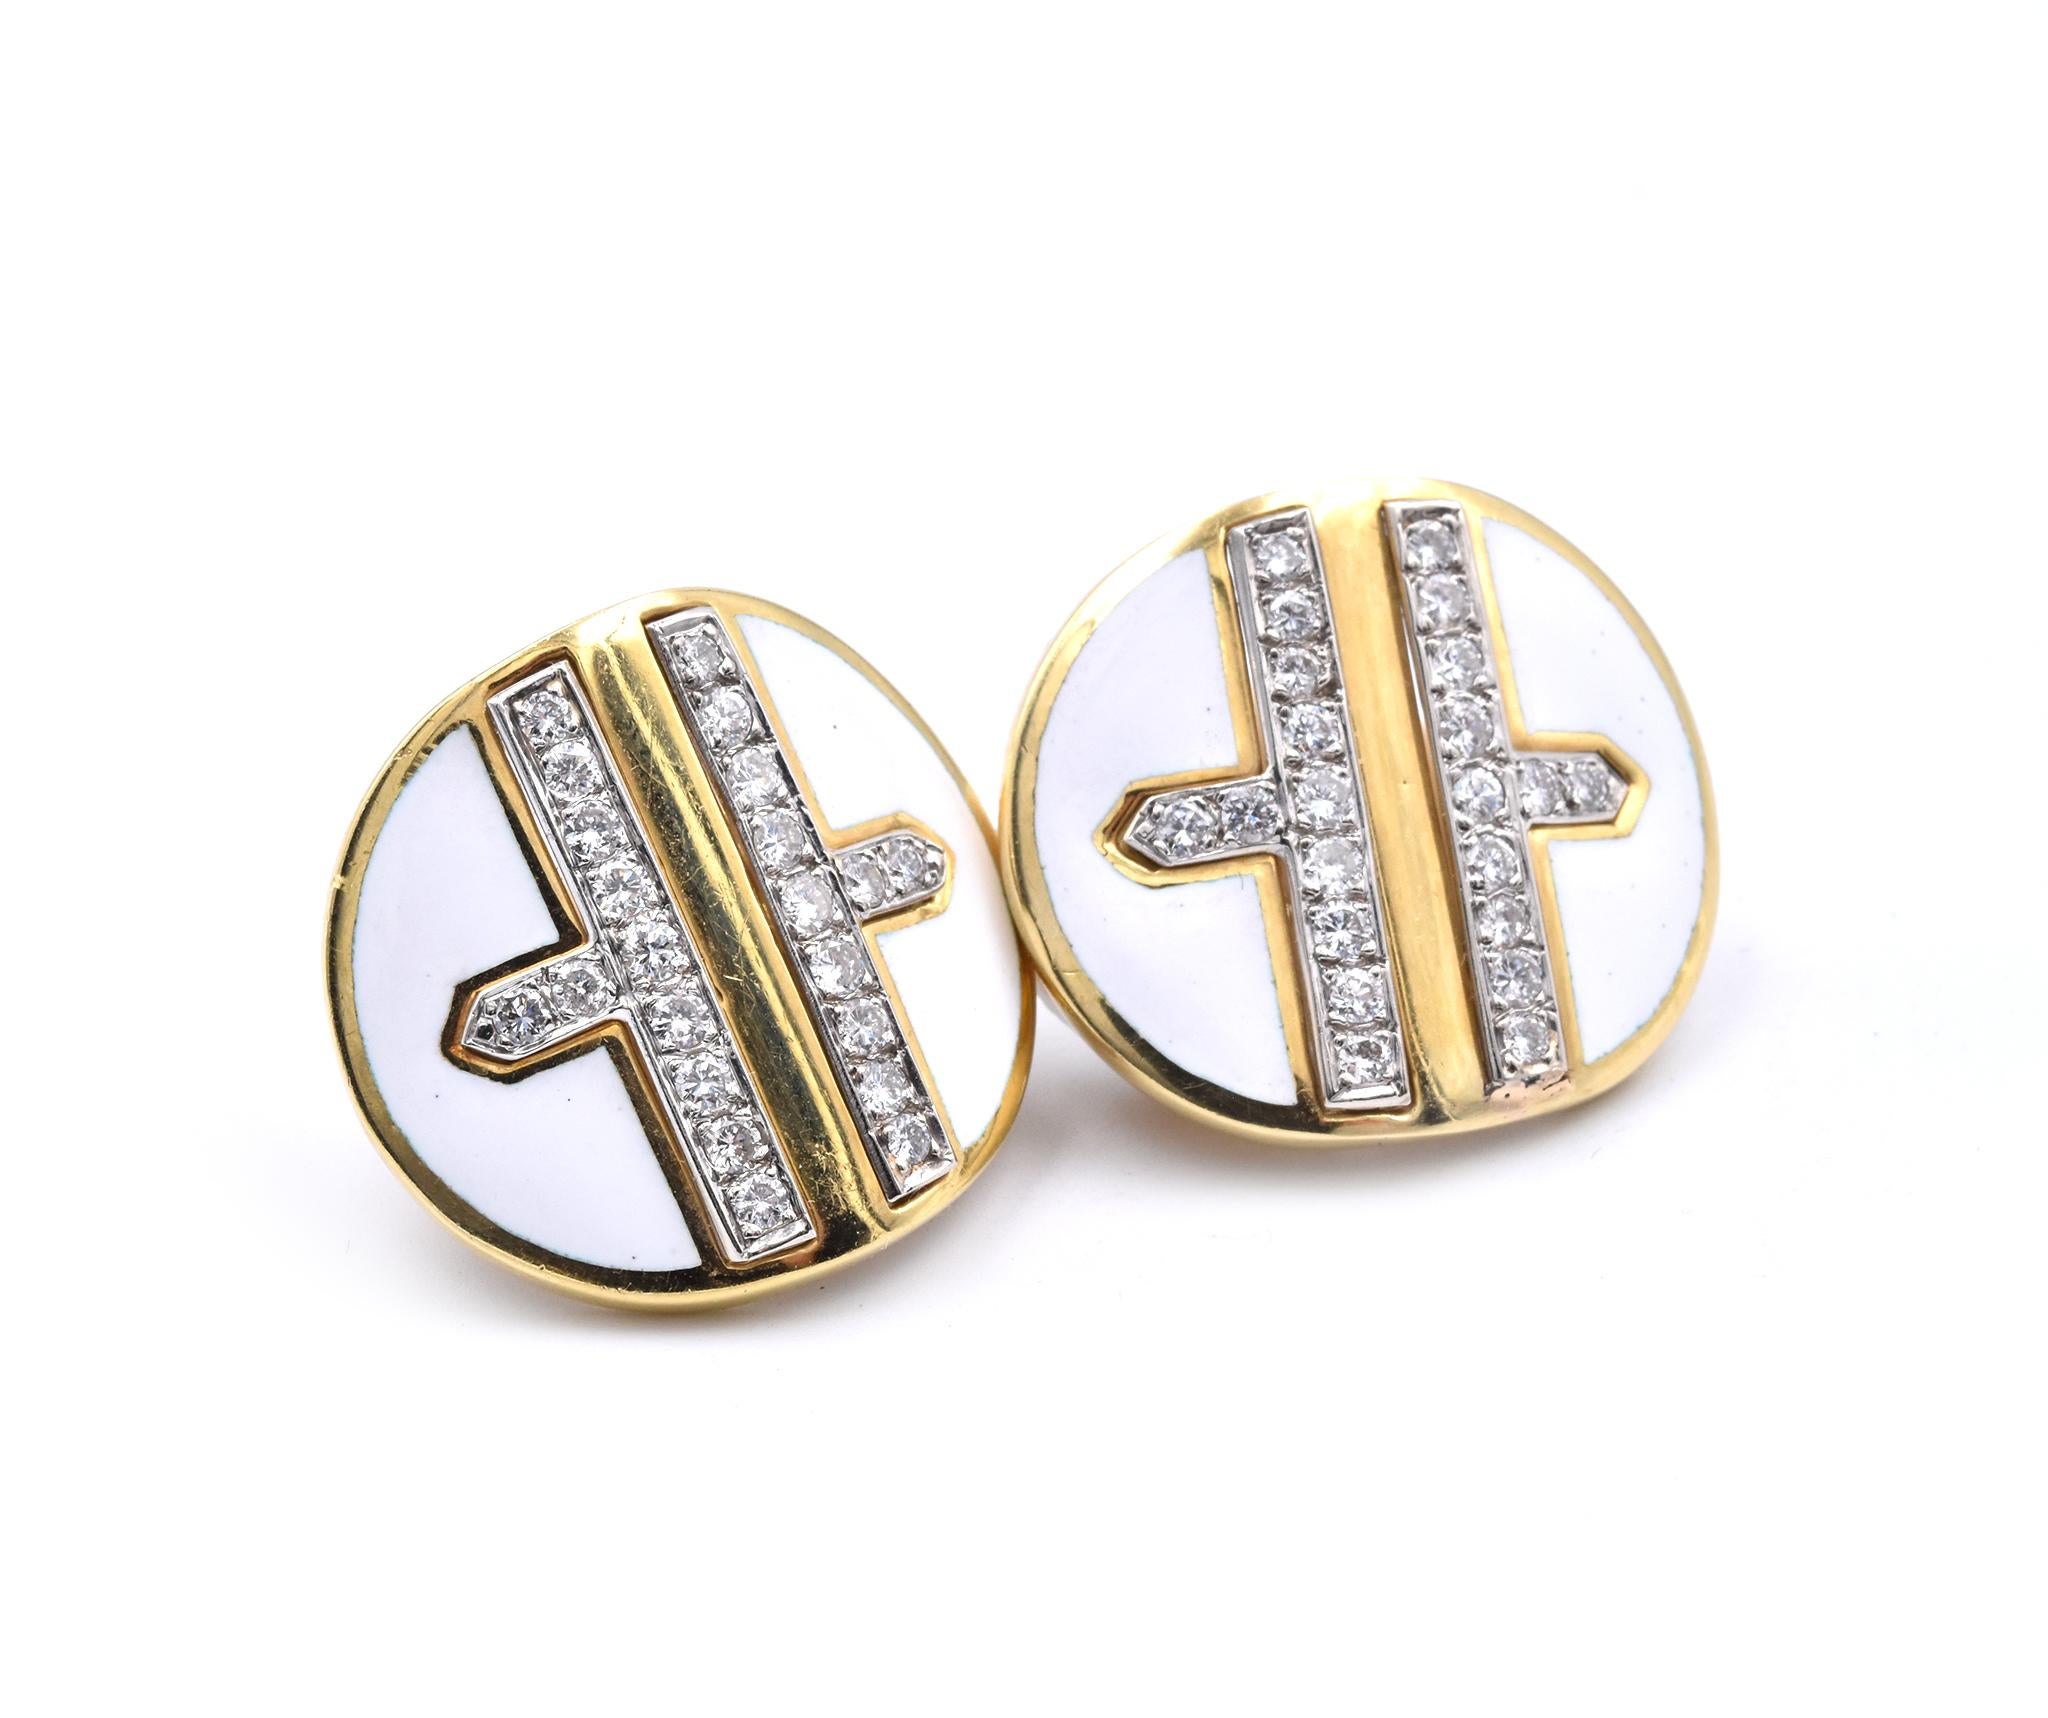 Designer: David Webb
Material: 18k yellow gold and platinum 
Diamonds: 44 round brilliant cuts = 2.00cttw
Color: F
Clarity: VS
Dimensions: earrings measure 25.55mm x 28.75mm
Weight: 31.7 grams
